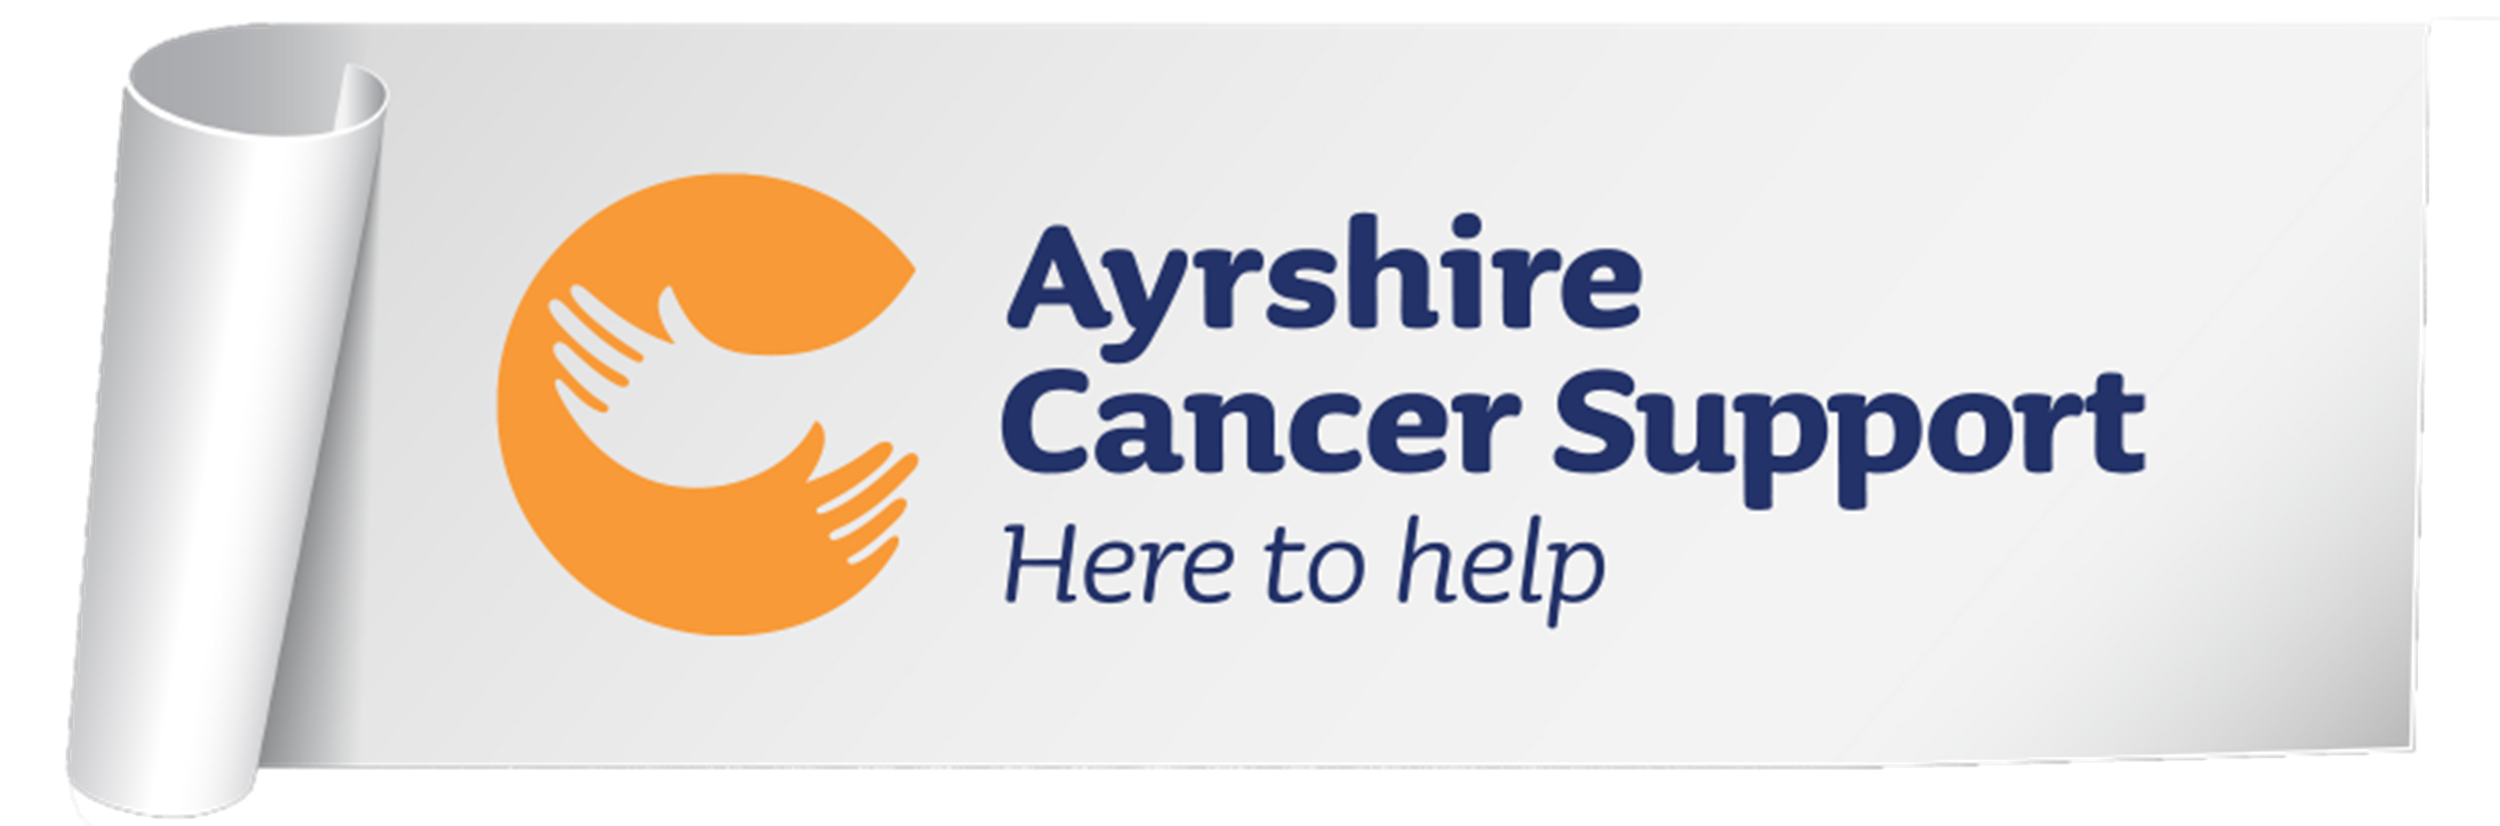 2021 Nominated Charity of the Year - Ayrshire Cancer Support